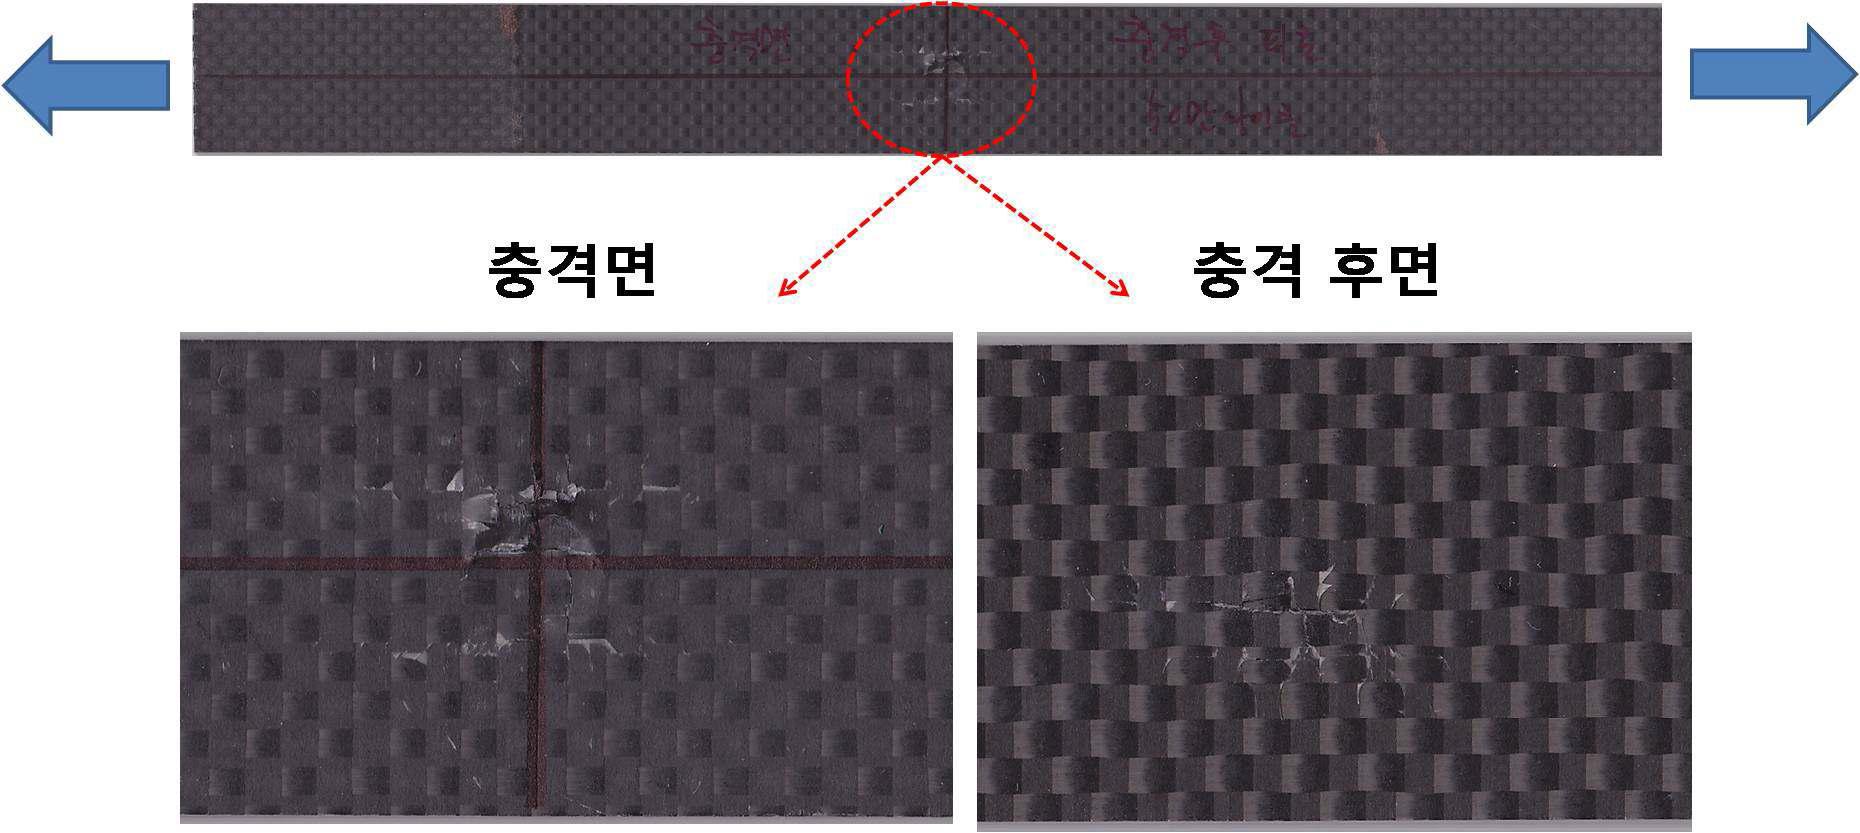 Fatigue behavior of woven CFRP with impact energy